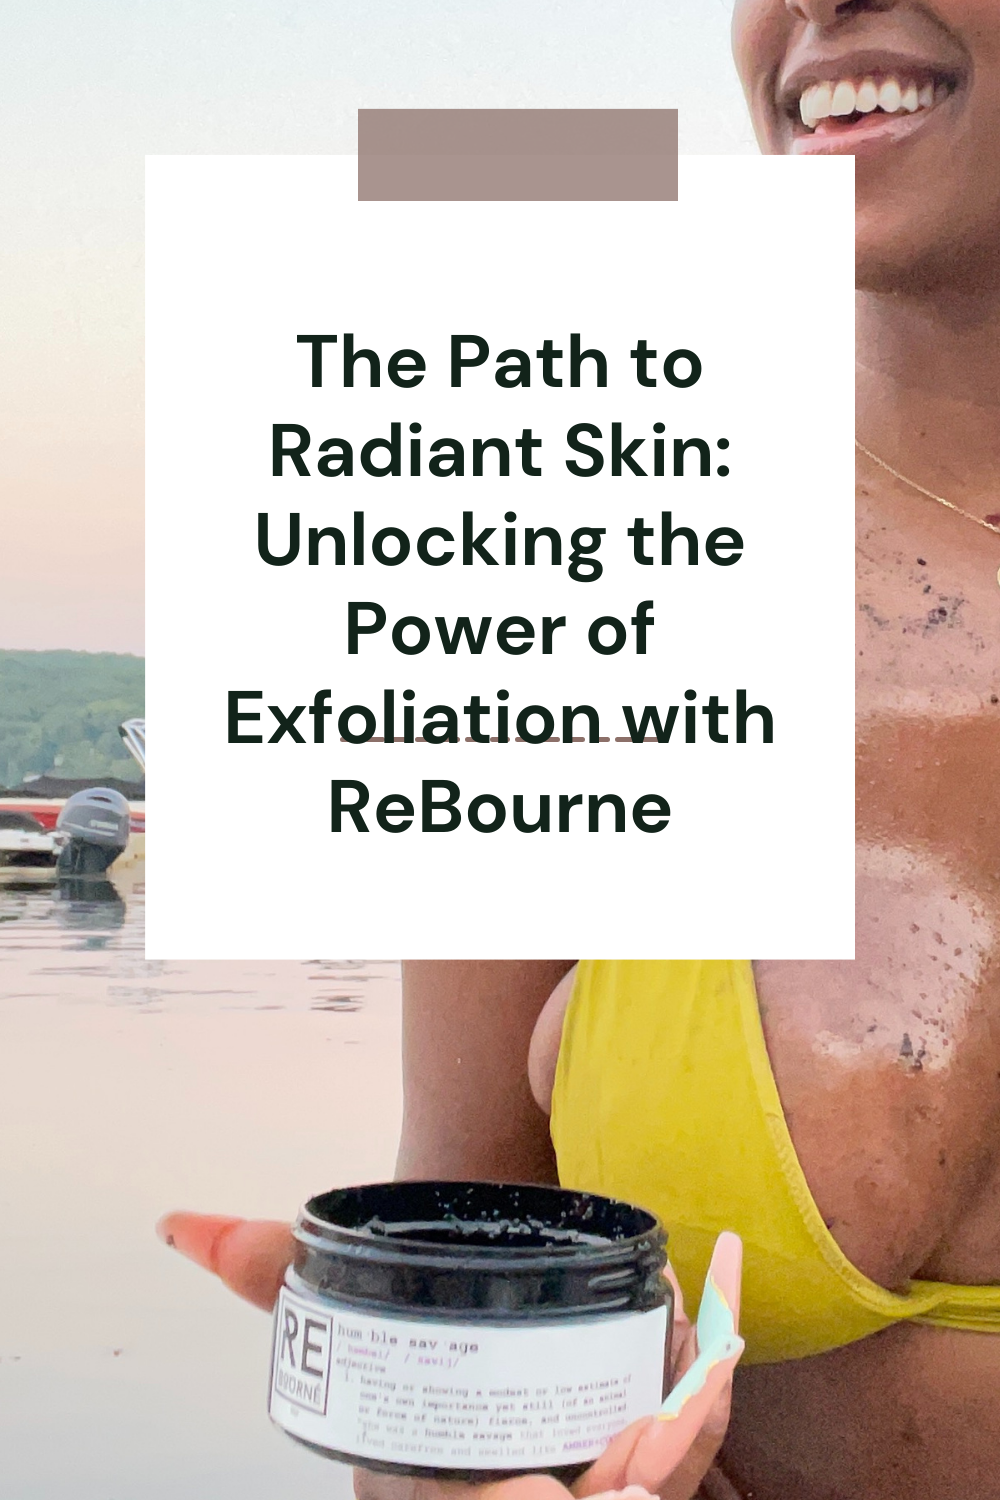 The Path to Radiant Skin: Unlocking the Power of Exfoliation with ReBourne